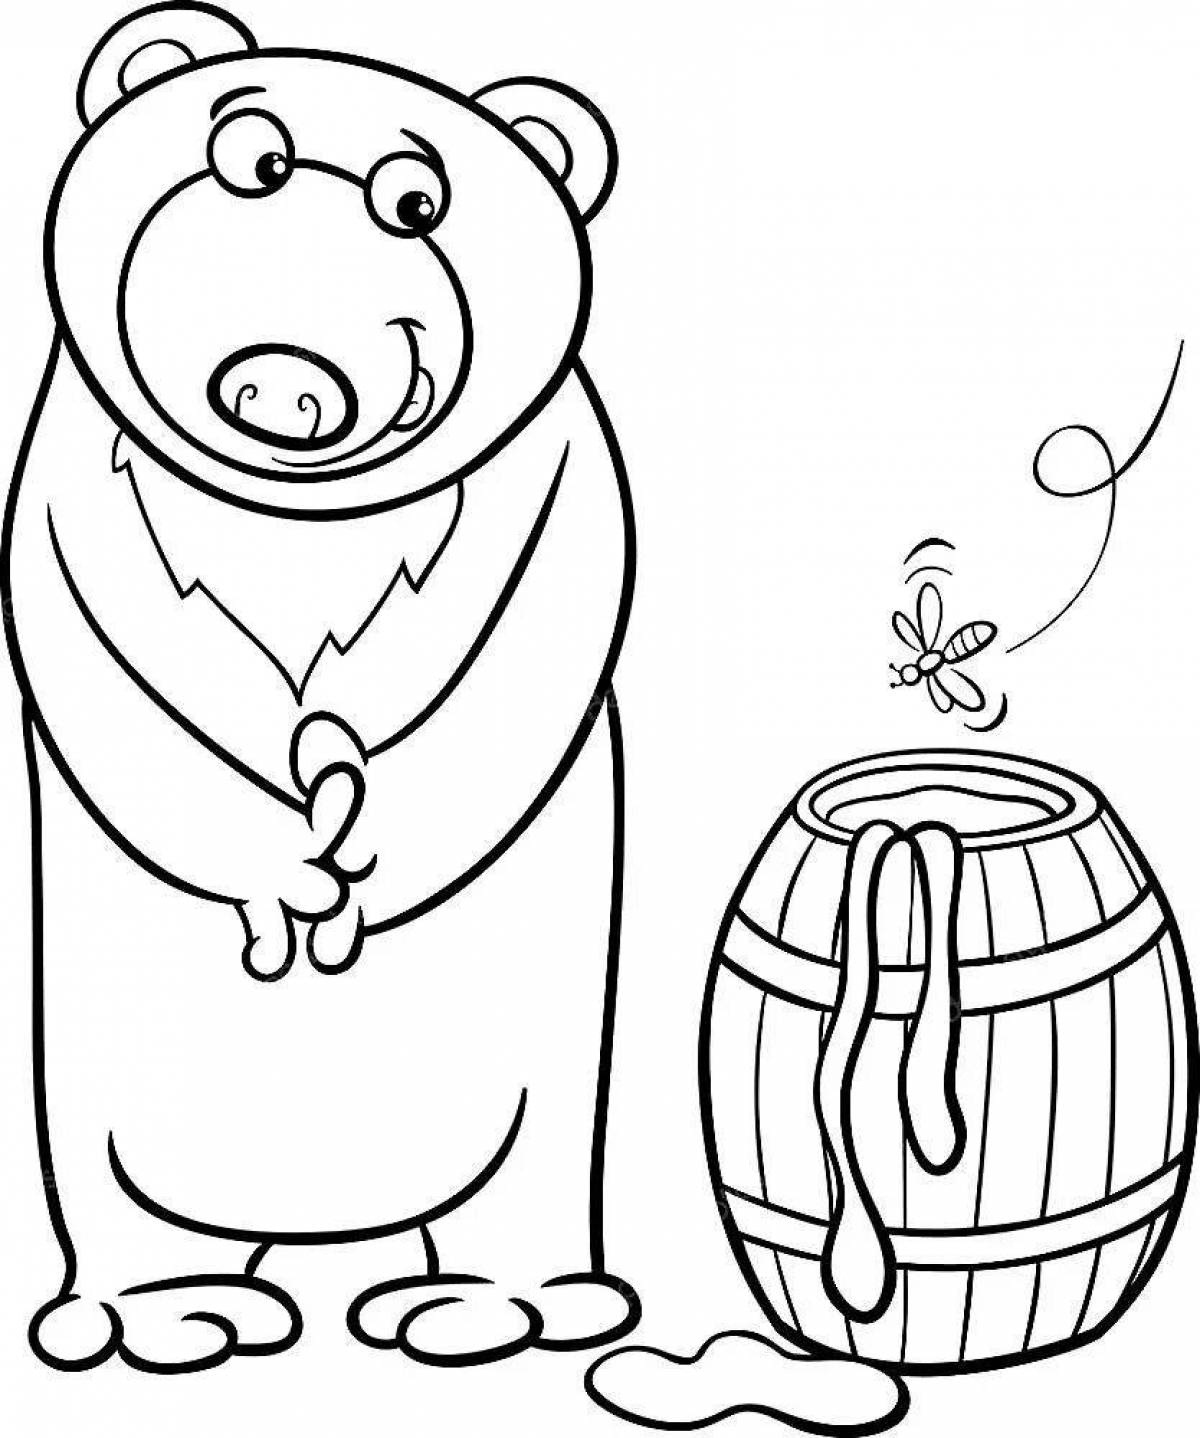 Coloring book funny bear with honey